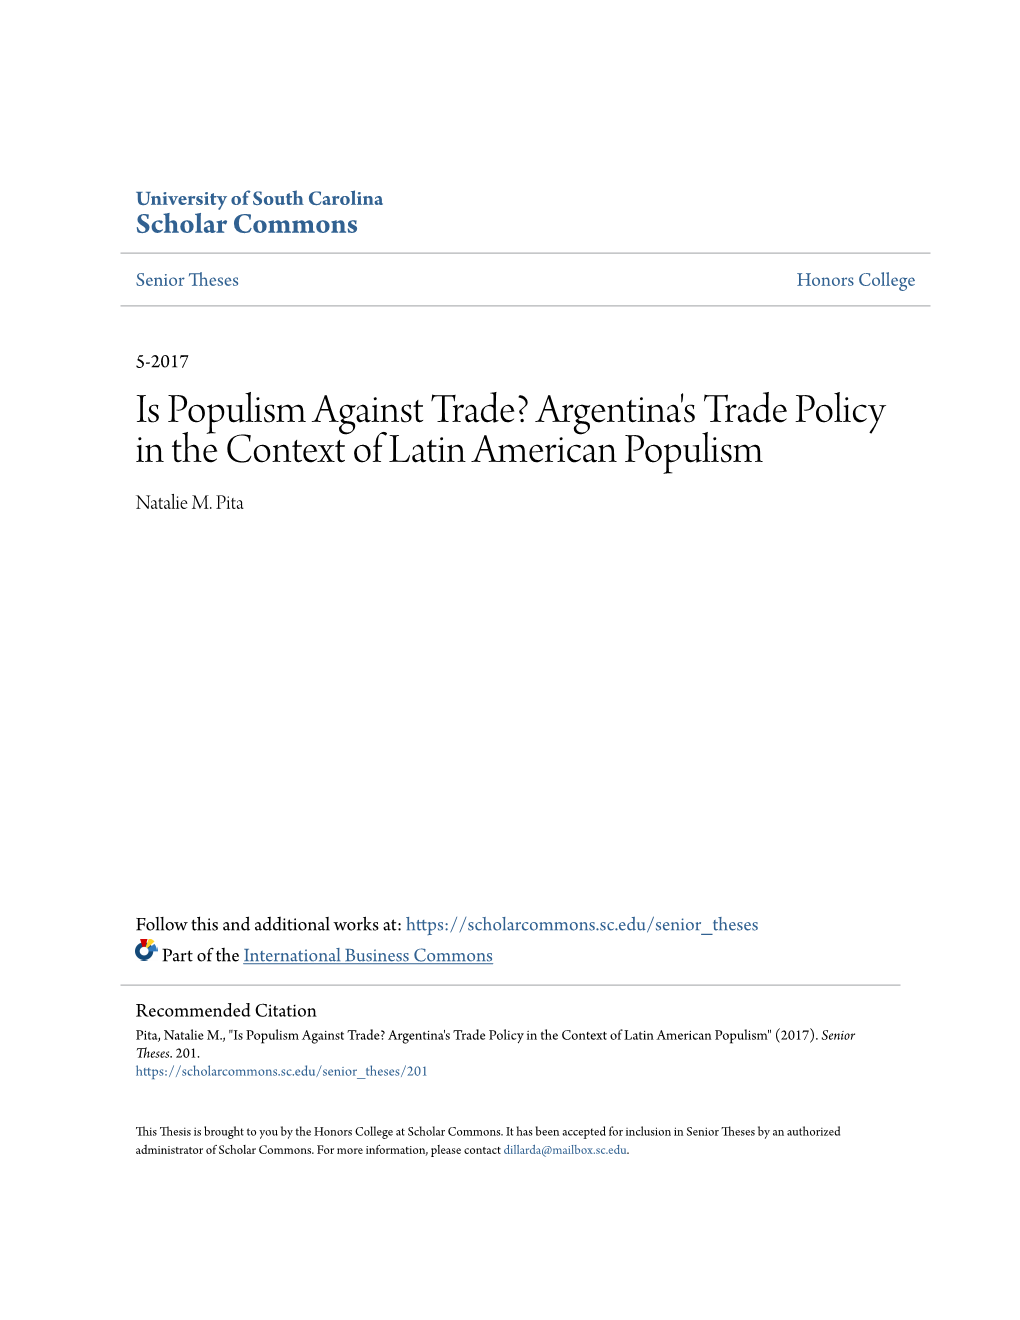 Argentina's Trade Policy in the Context of Latin American Populism Natalie M